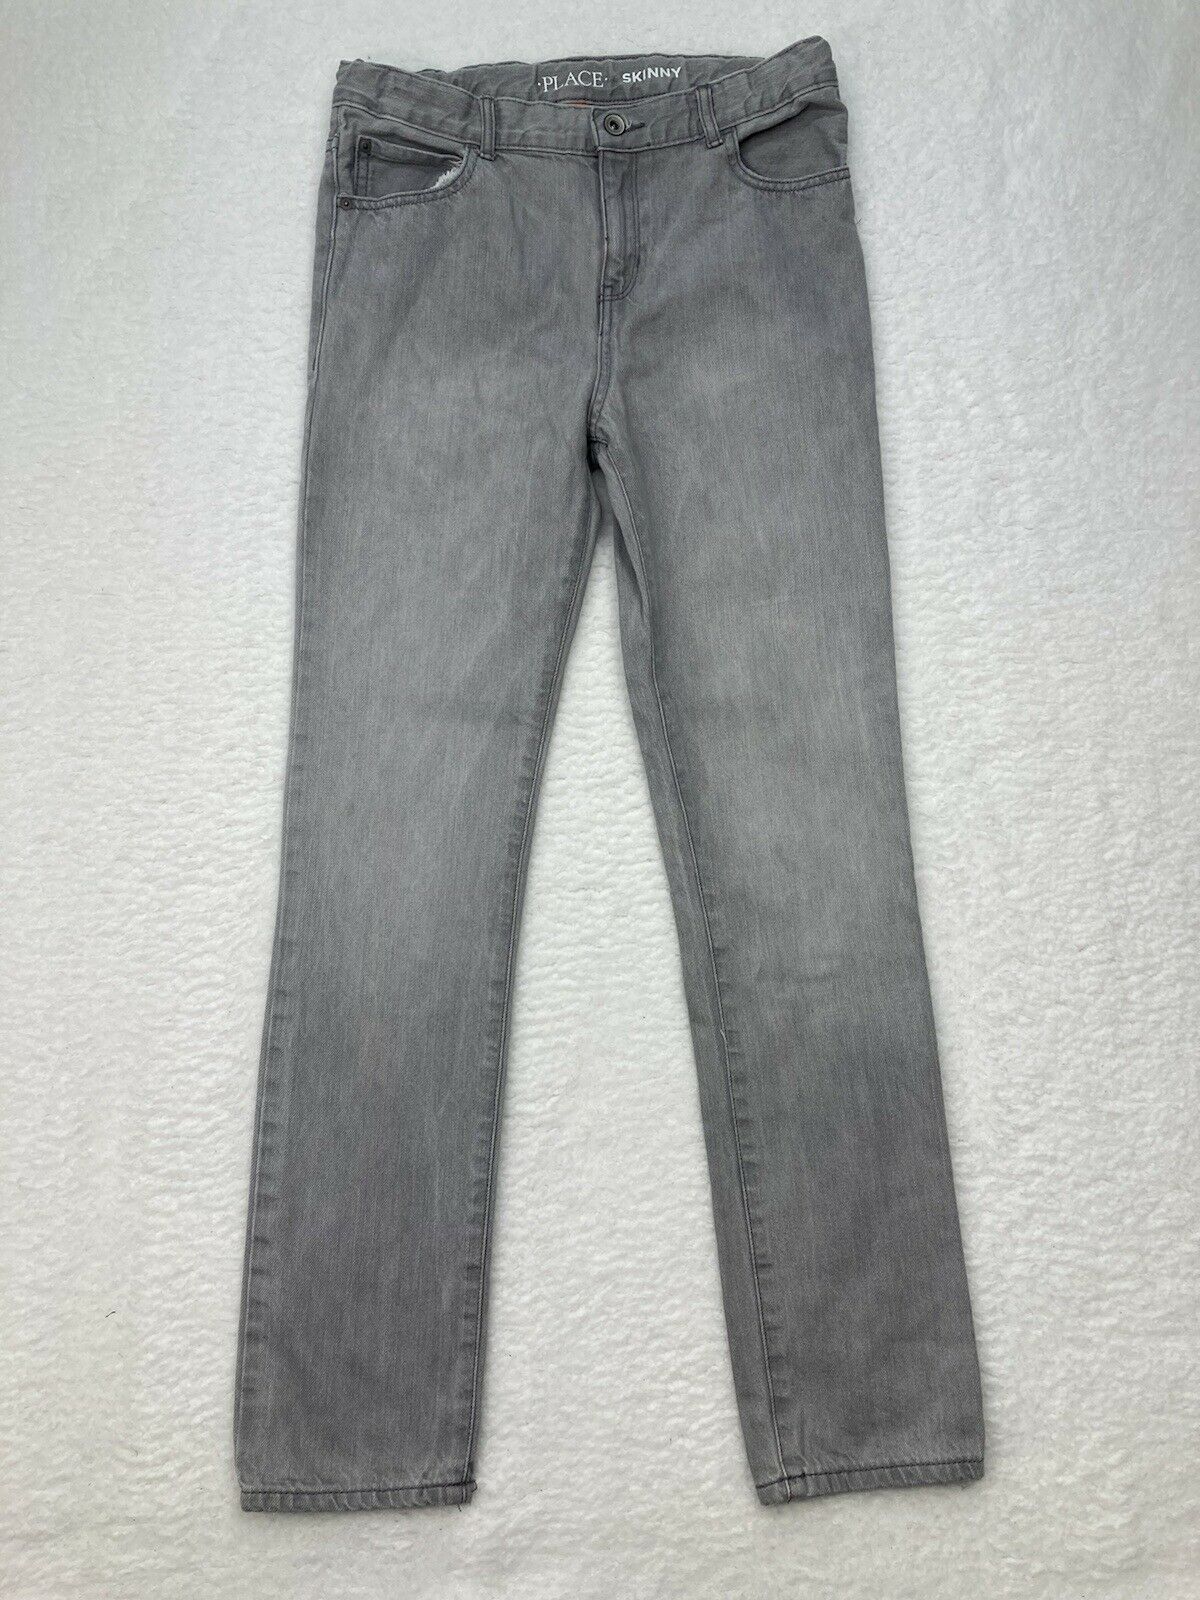 Childrens Place Skinny Denim Jeans Size 16 Gray  Actual 28/30